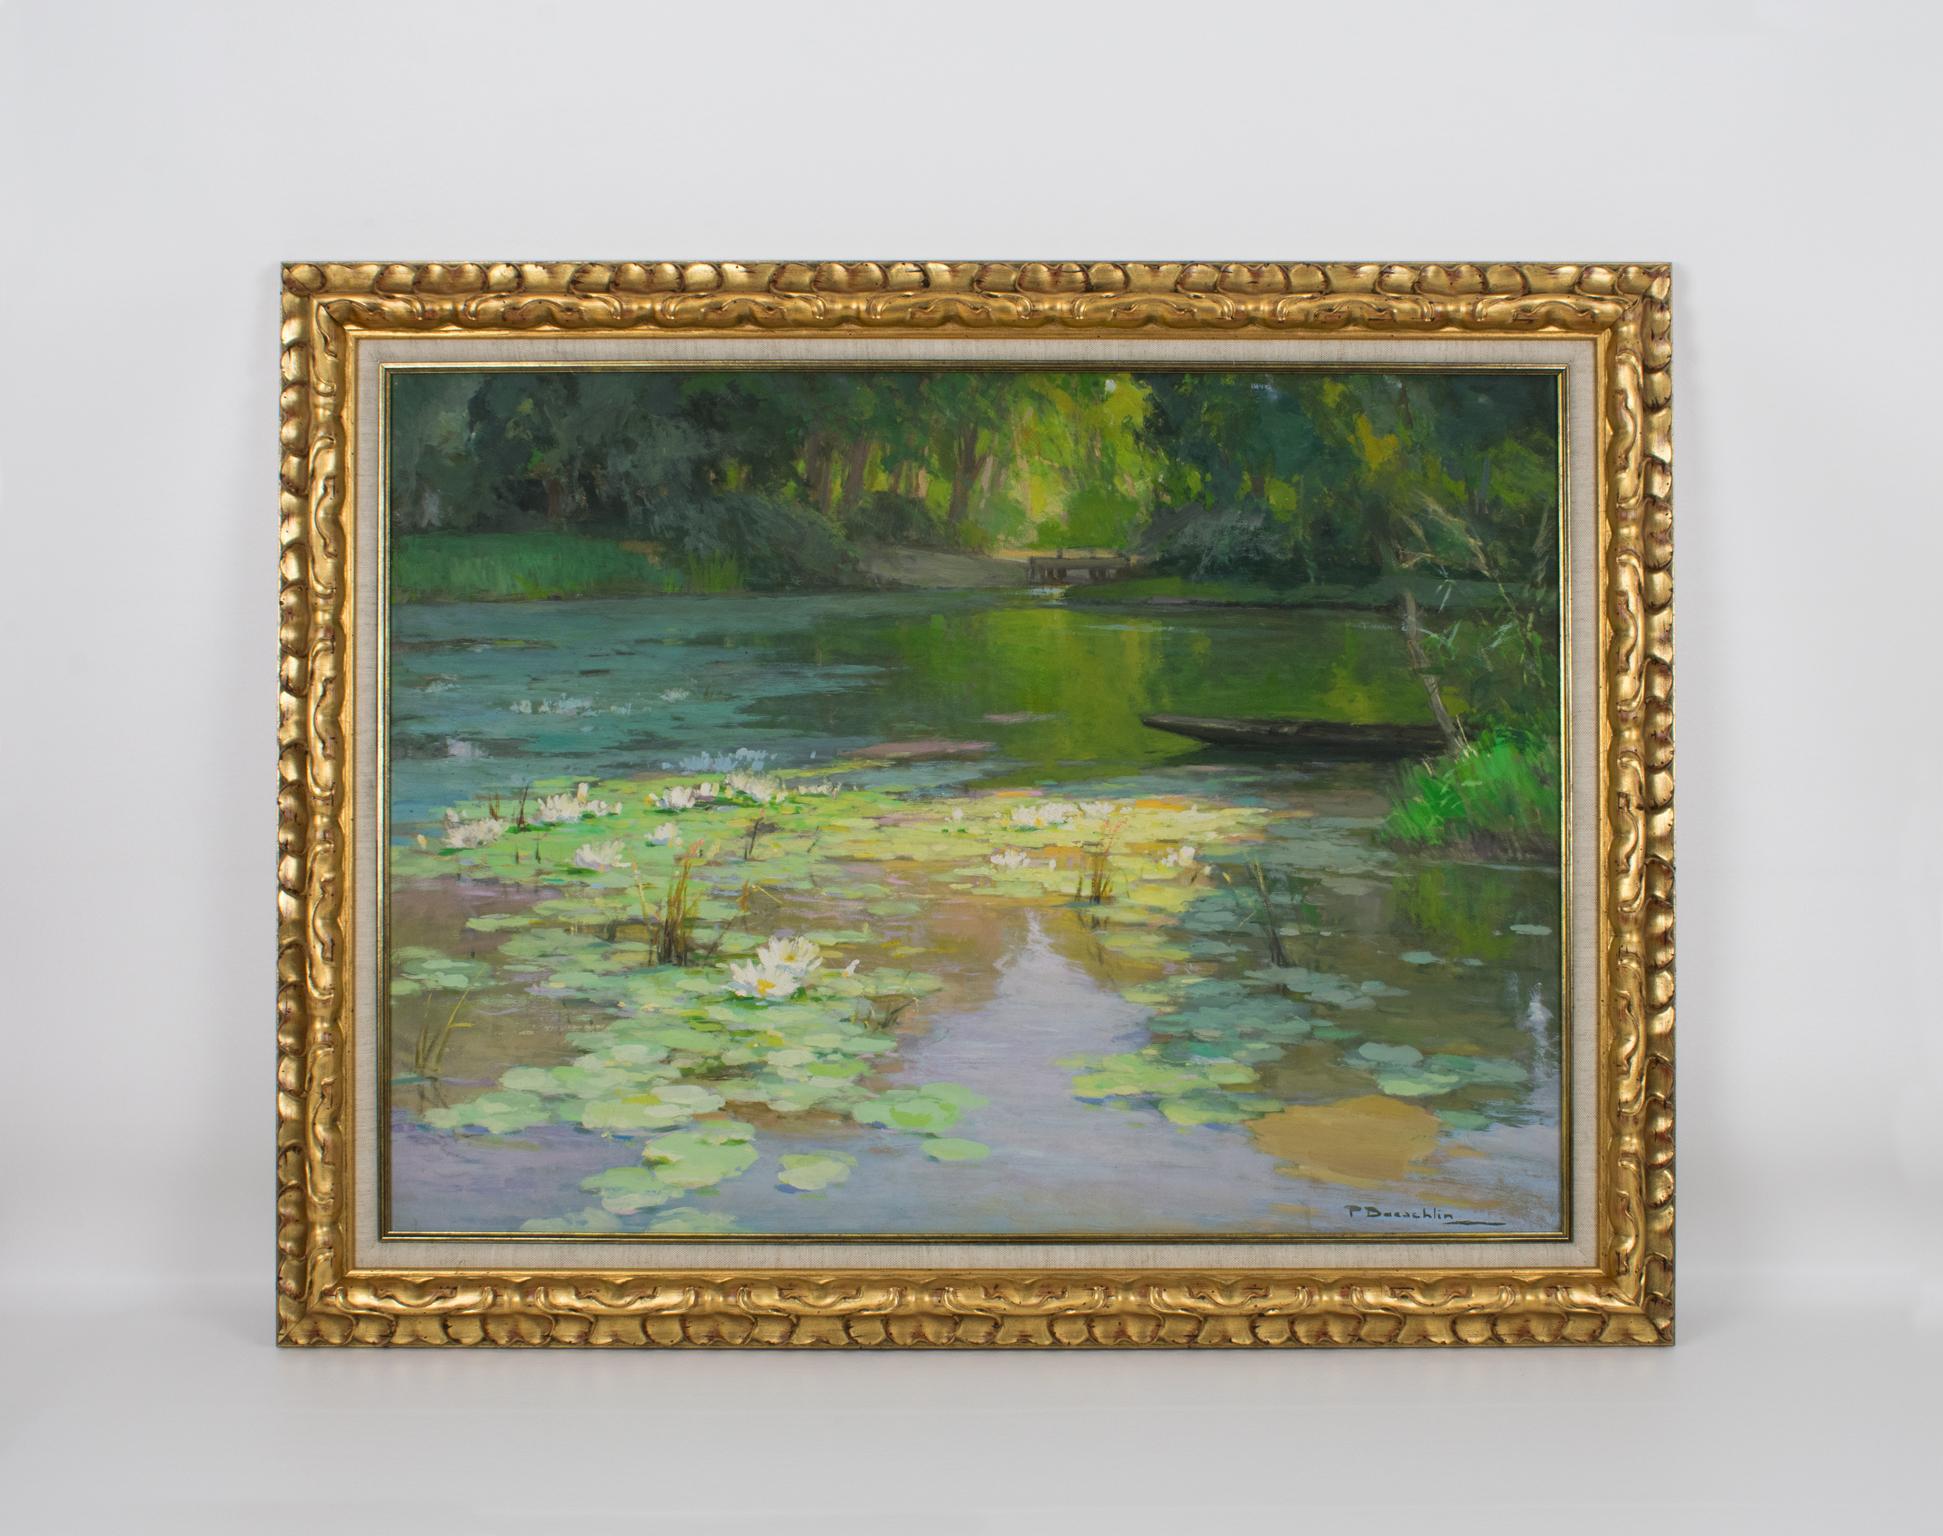 The Water Lilies, Oil on Masonite Board Painting by Pierre Laurent Baeschlin 1